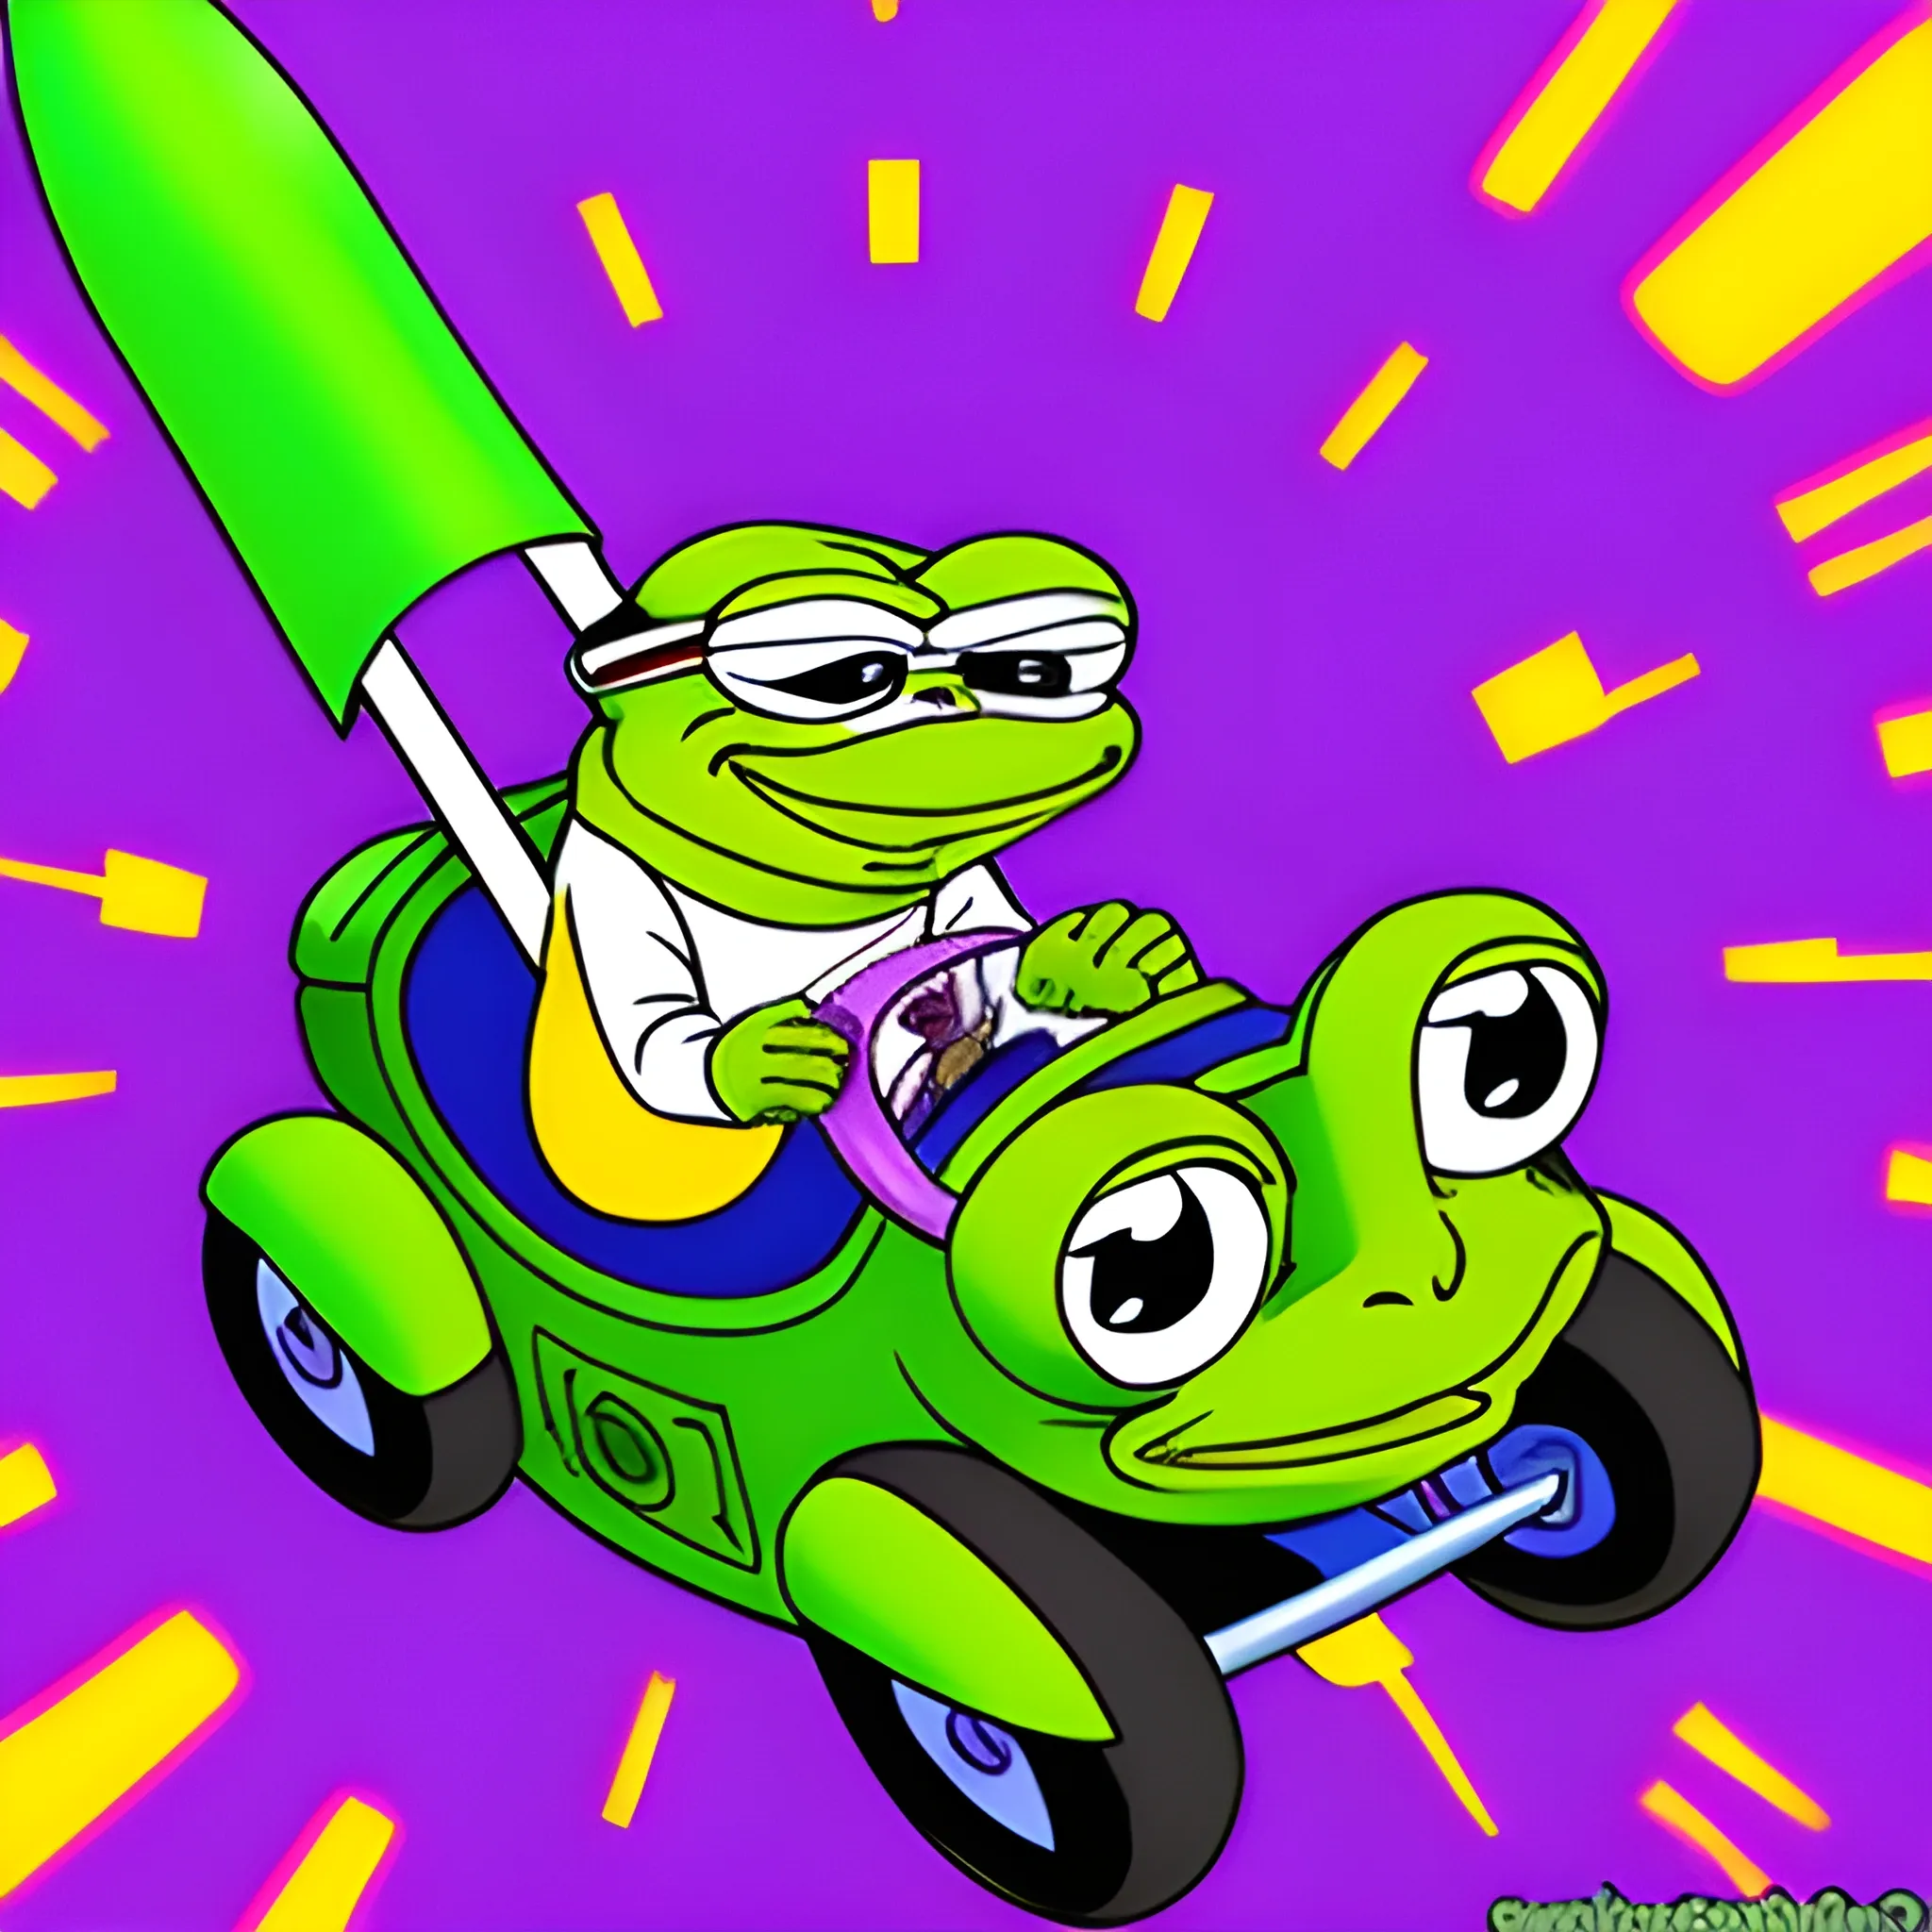 purple Pepe the Frog with a mischievous grin, riding a rocket labeled "Monad" a The rocket could have flames shooting out the back with a speedometer showing "10,000 transactions per second" as Pepe zooms past. , Cartoon